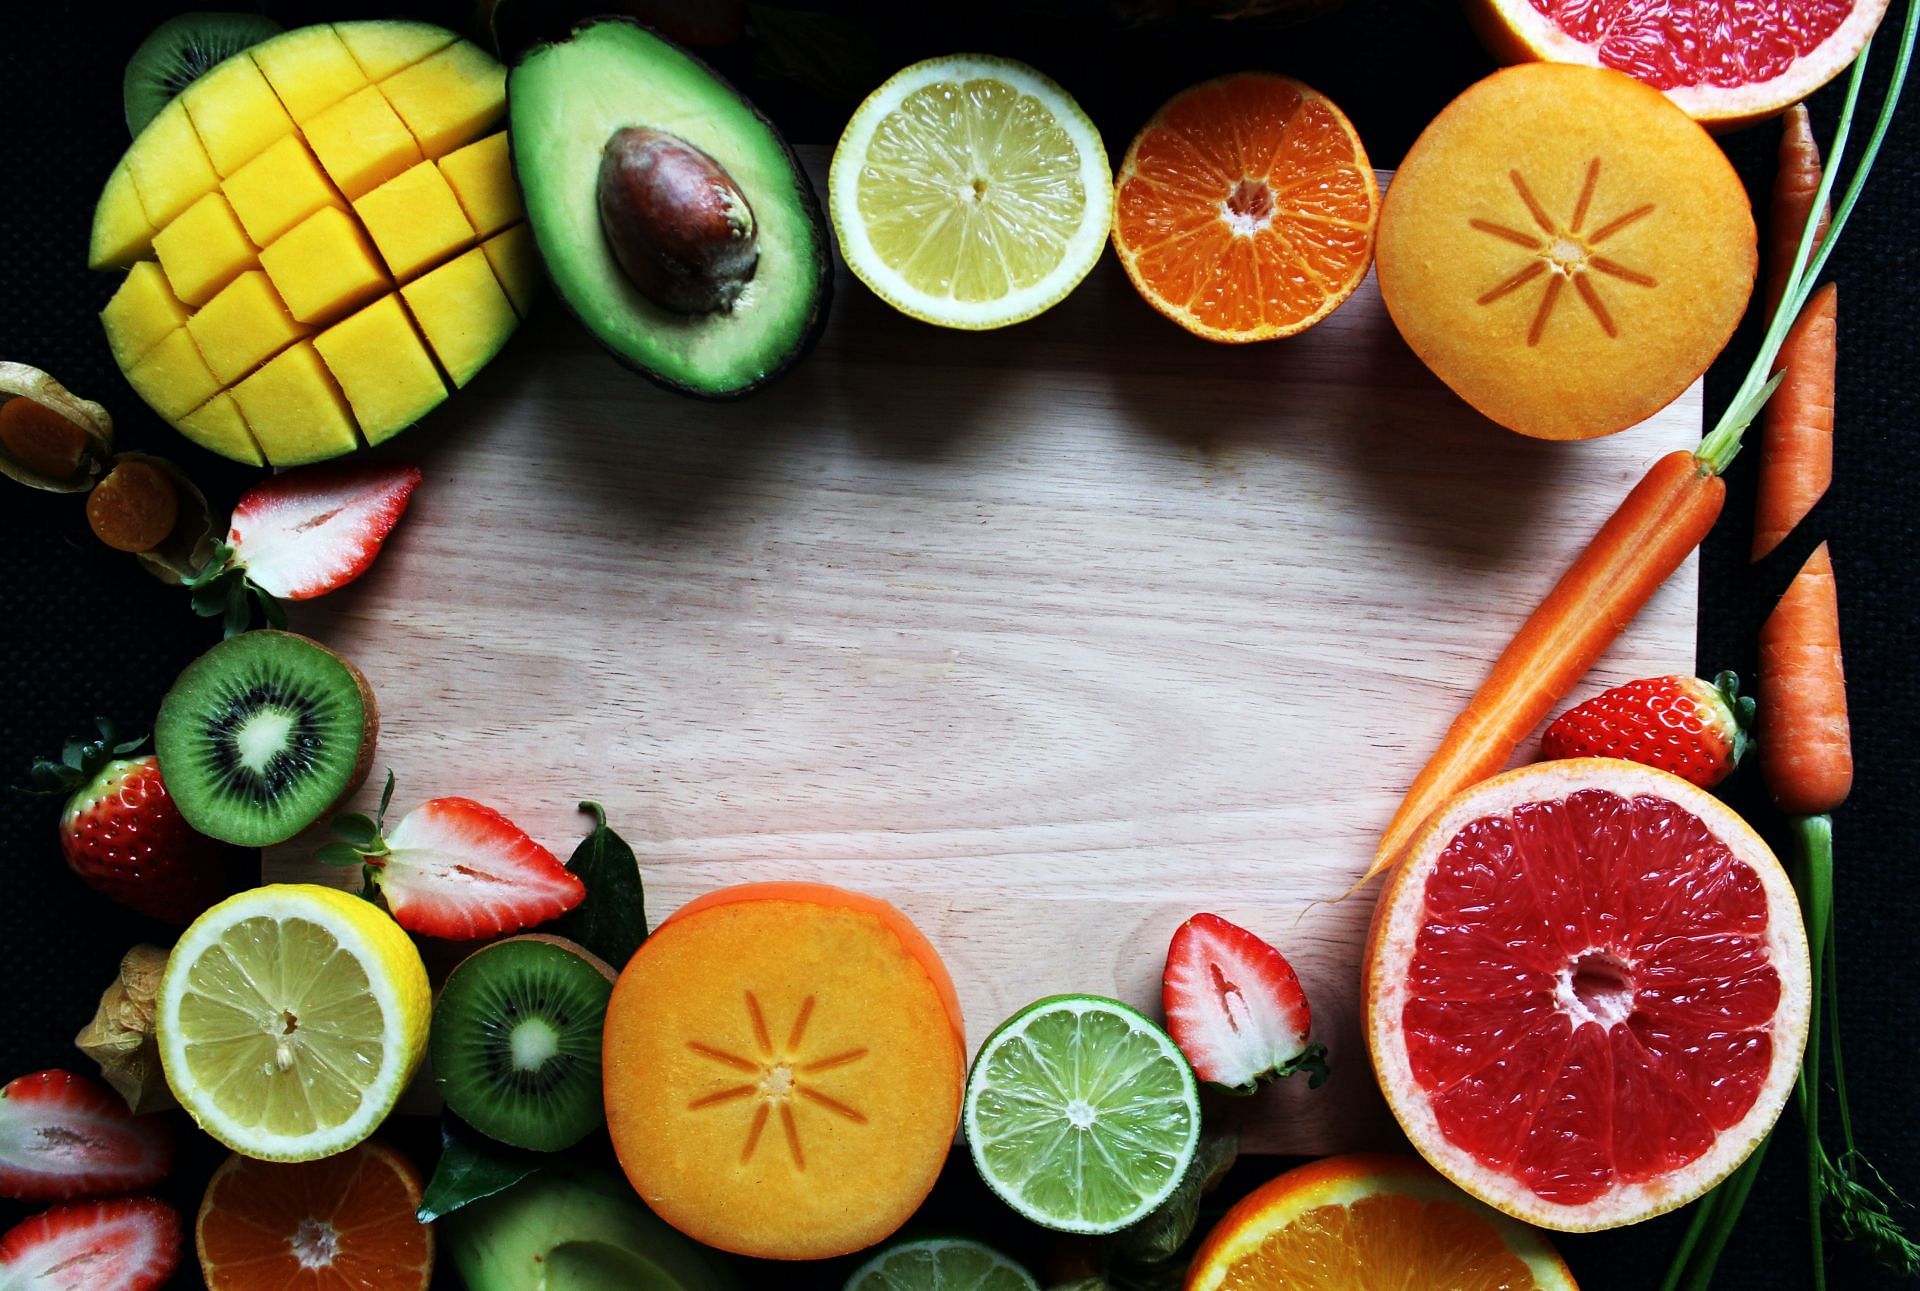 All fruits should be avoided during the first phase (Image via Unsplash/Amoon Ra)